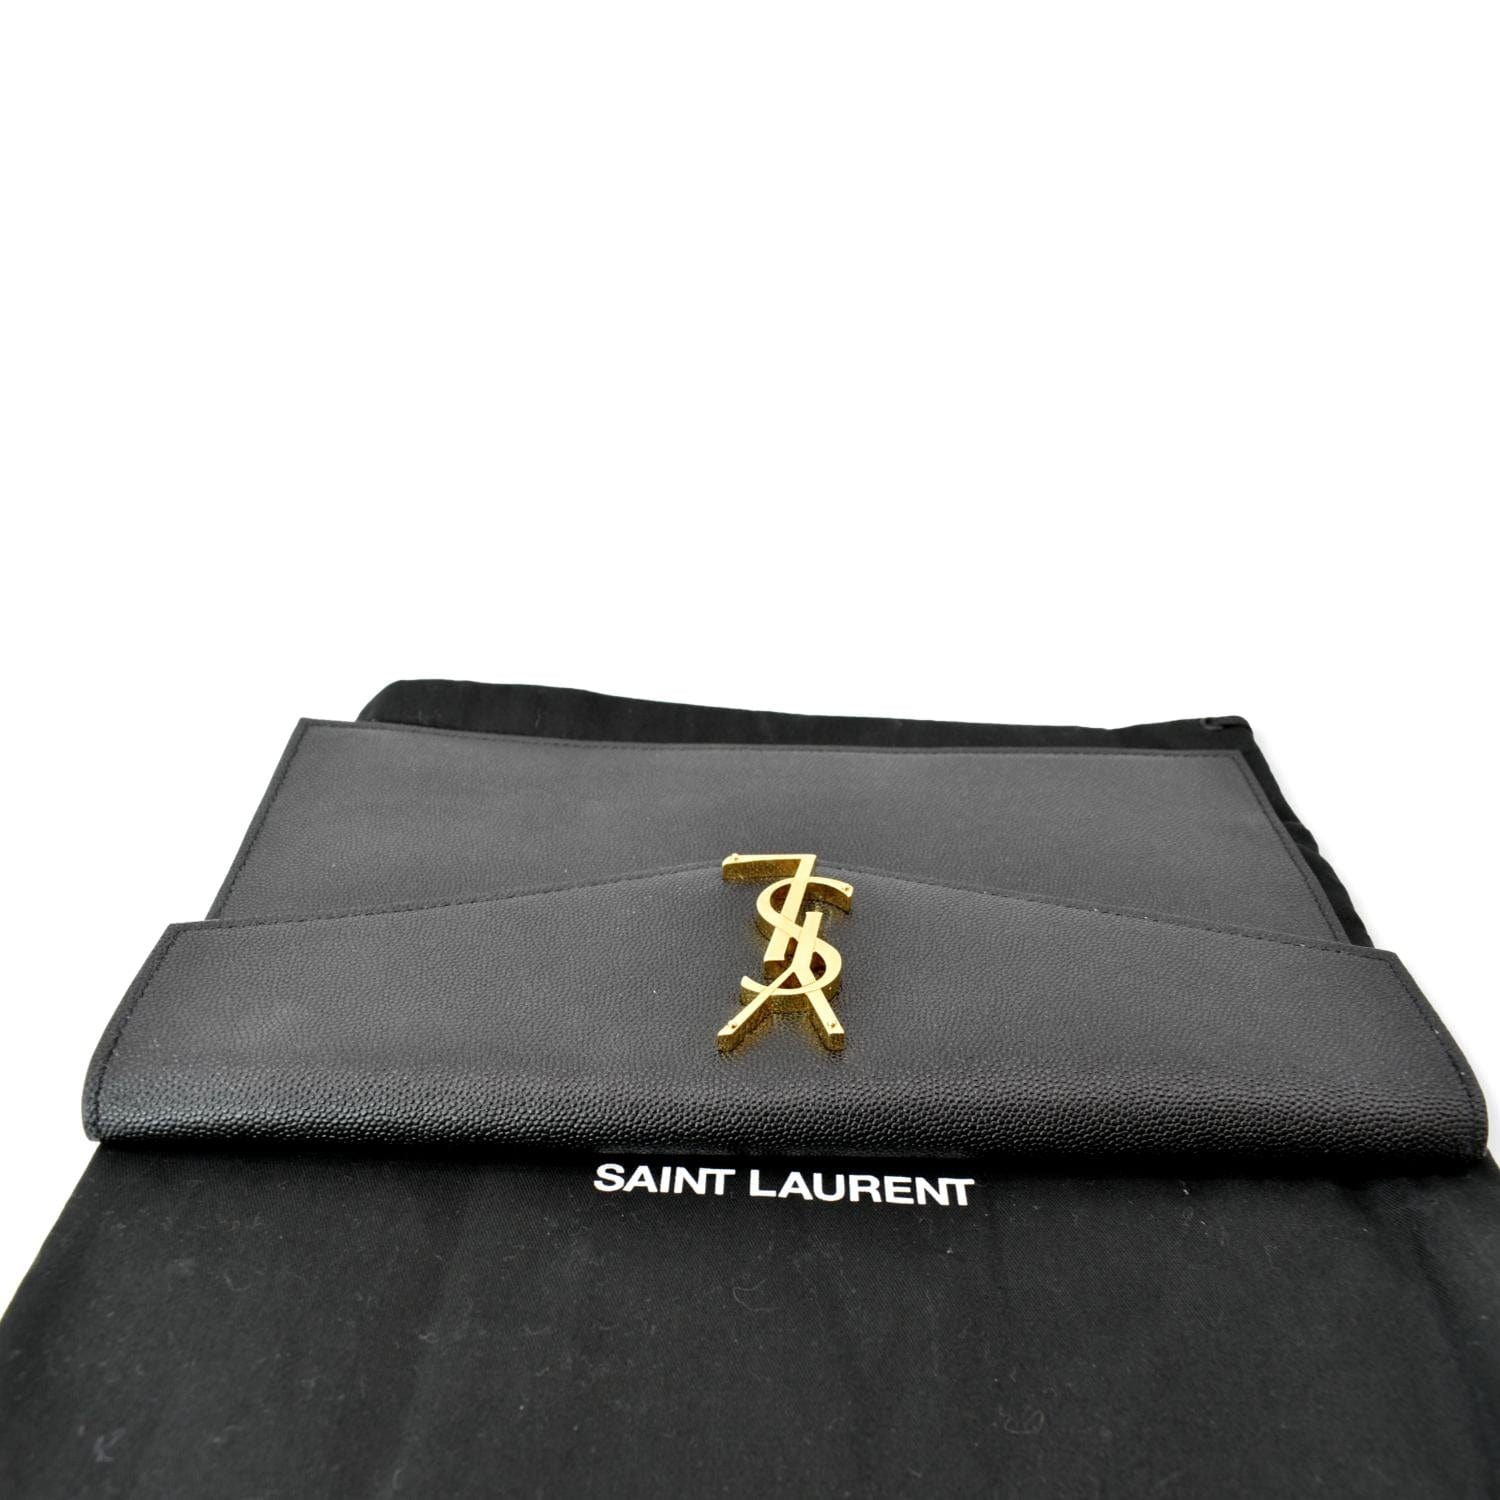 Bring double the trouble when you rock the @YSL Uptown bag. The front flap  is a removable envelope clutch, perfect for desk to d…